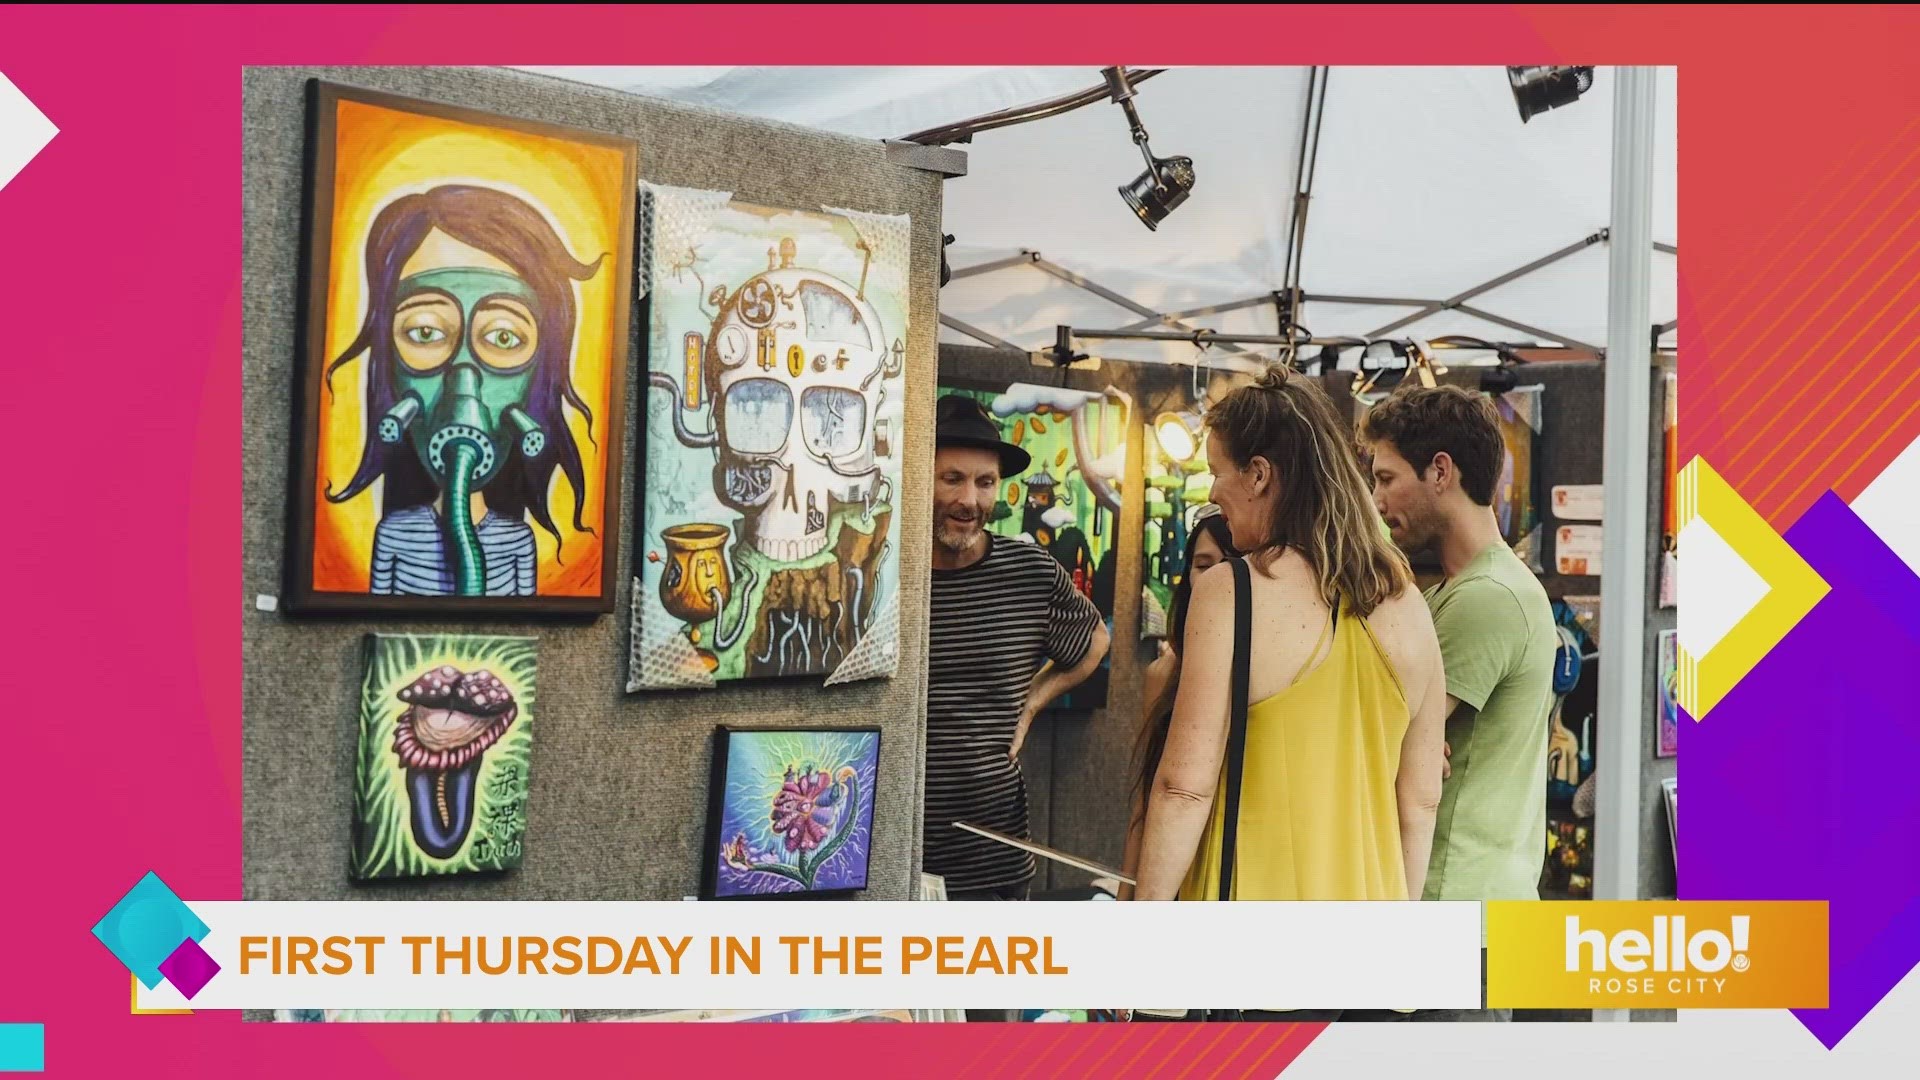 The street gallery and art walk in the Pearl happens on the first Thursday of every month, April - October